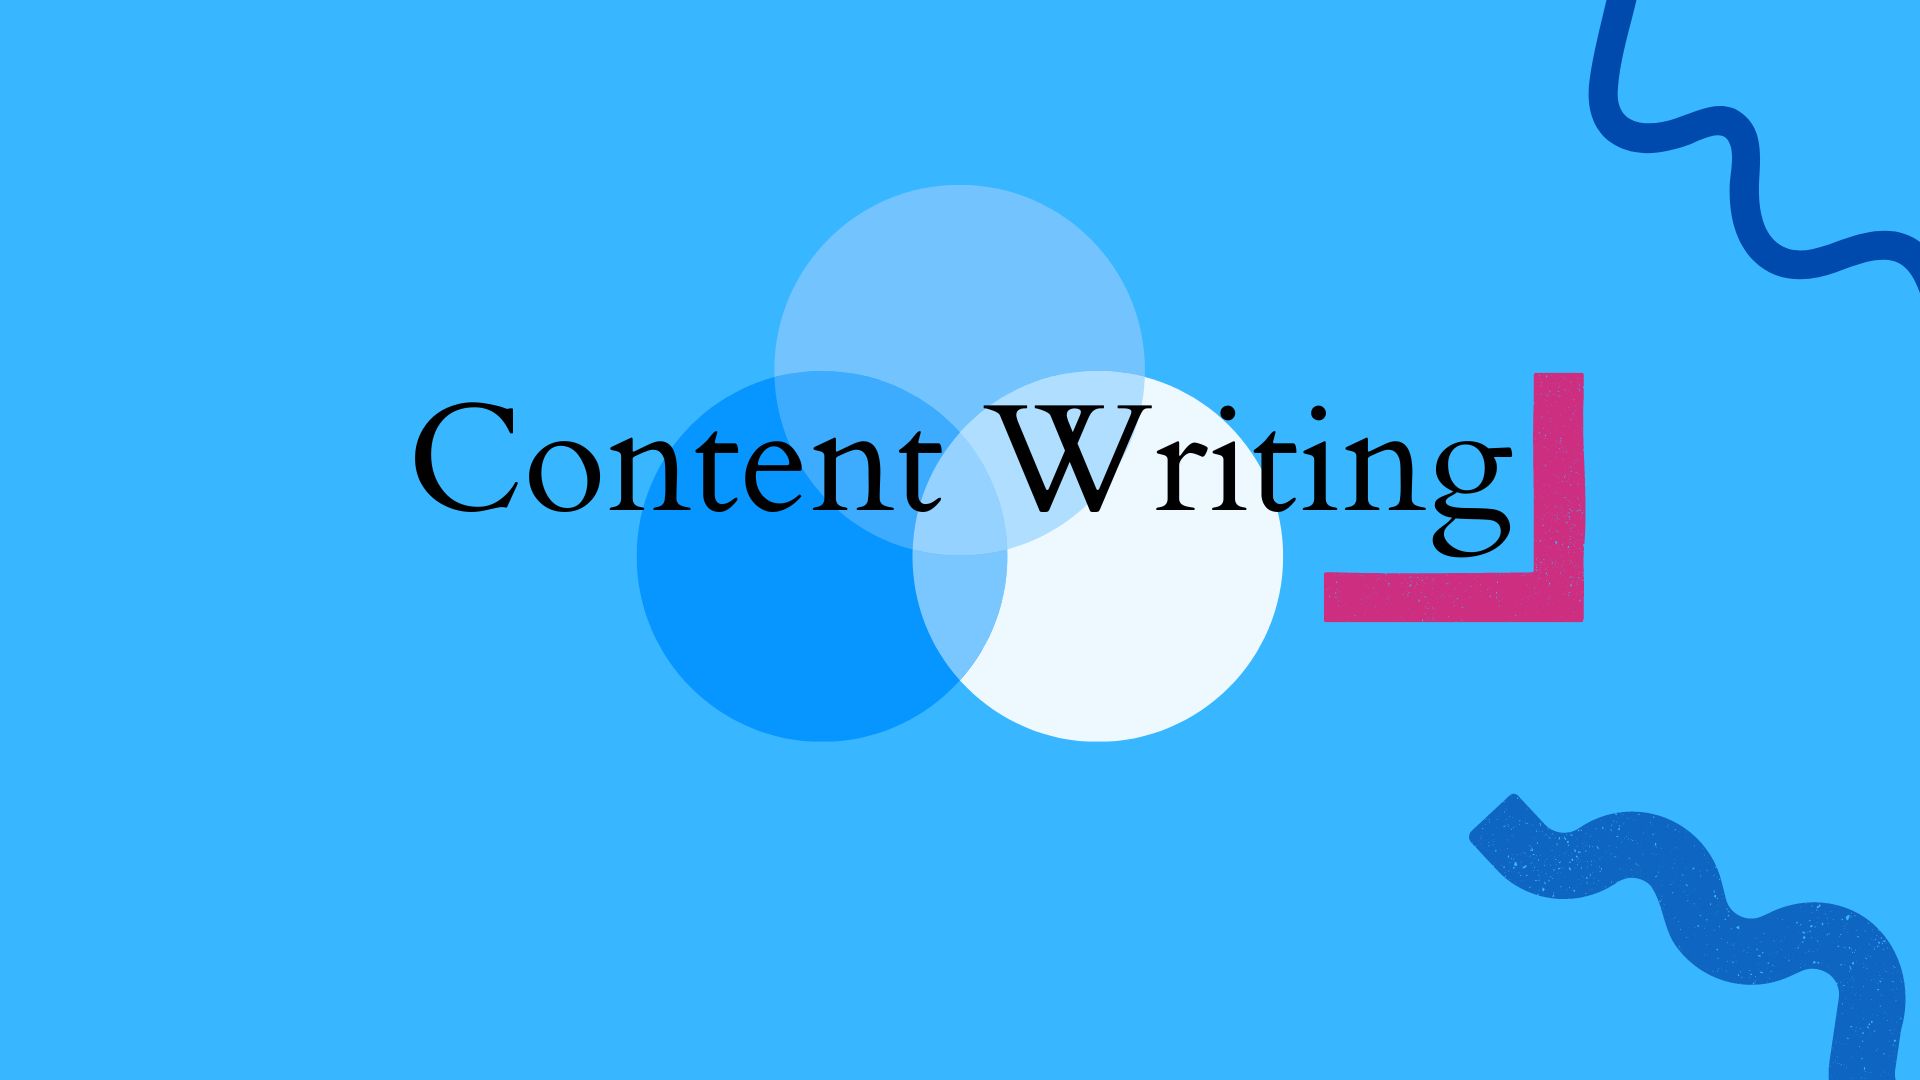 Content Writing Featured Image